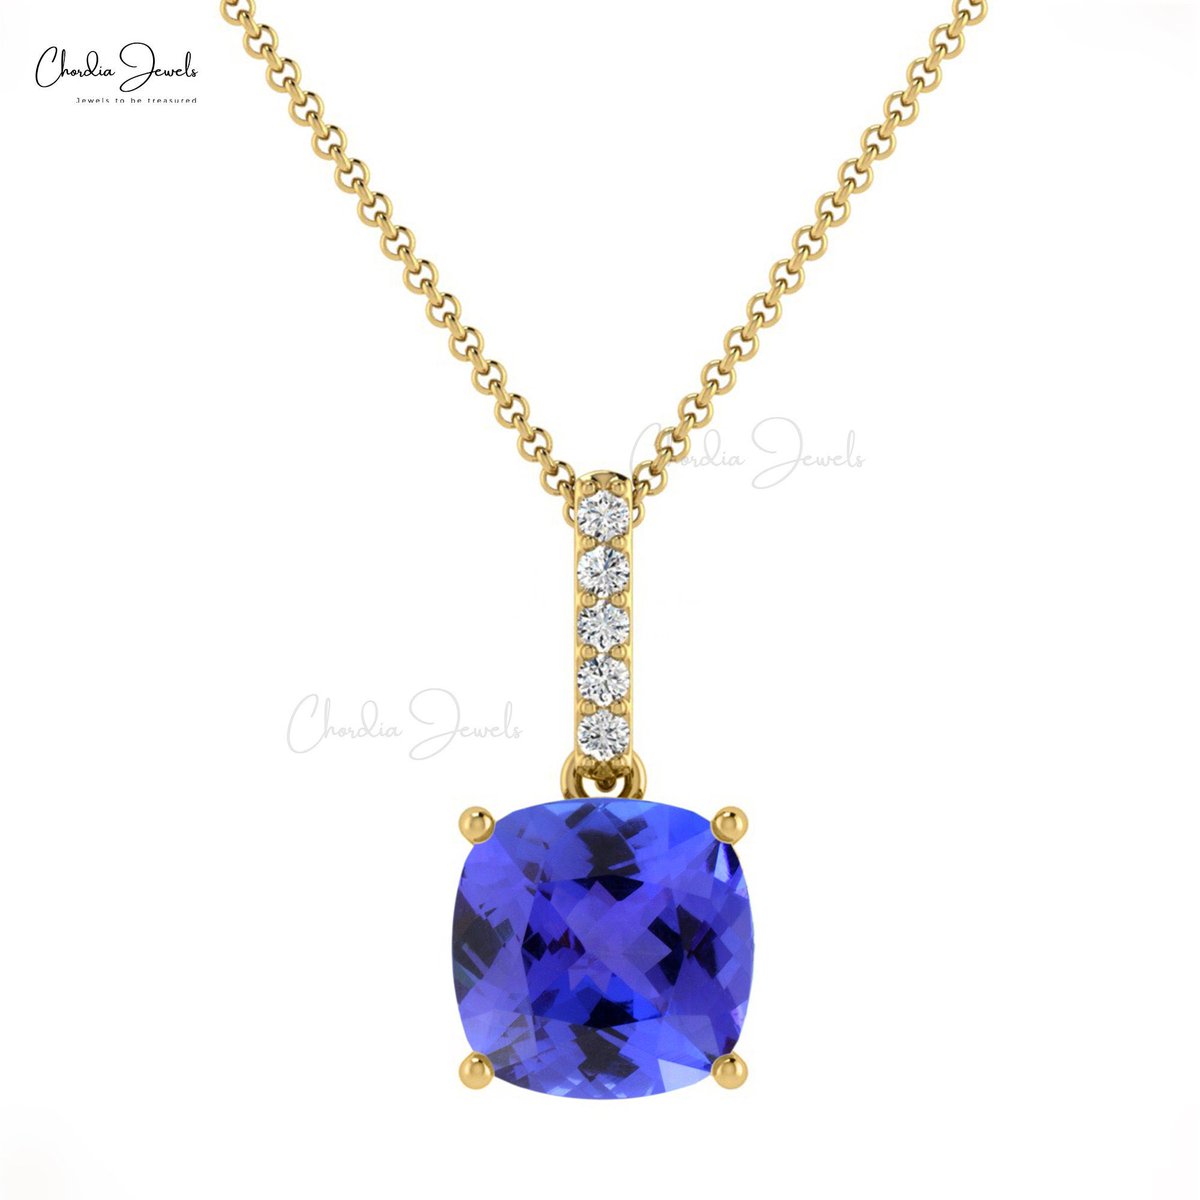 Natural Tanzanite Dangling Pendant
⁦@Etsy⁩
#etsy #tanzanitependant #danglingpendant #solitairependant #christmasgift #gold 
Visit this link for more info-
etsy.me/3OPreas